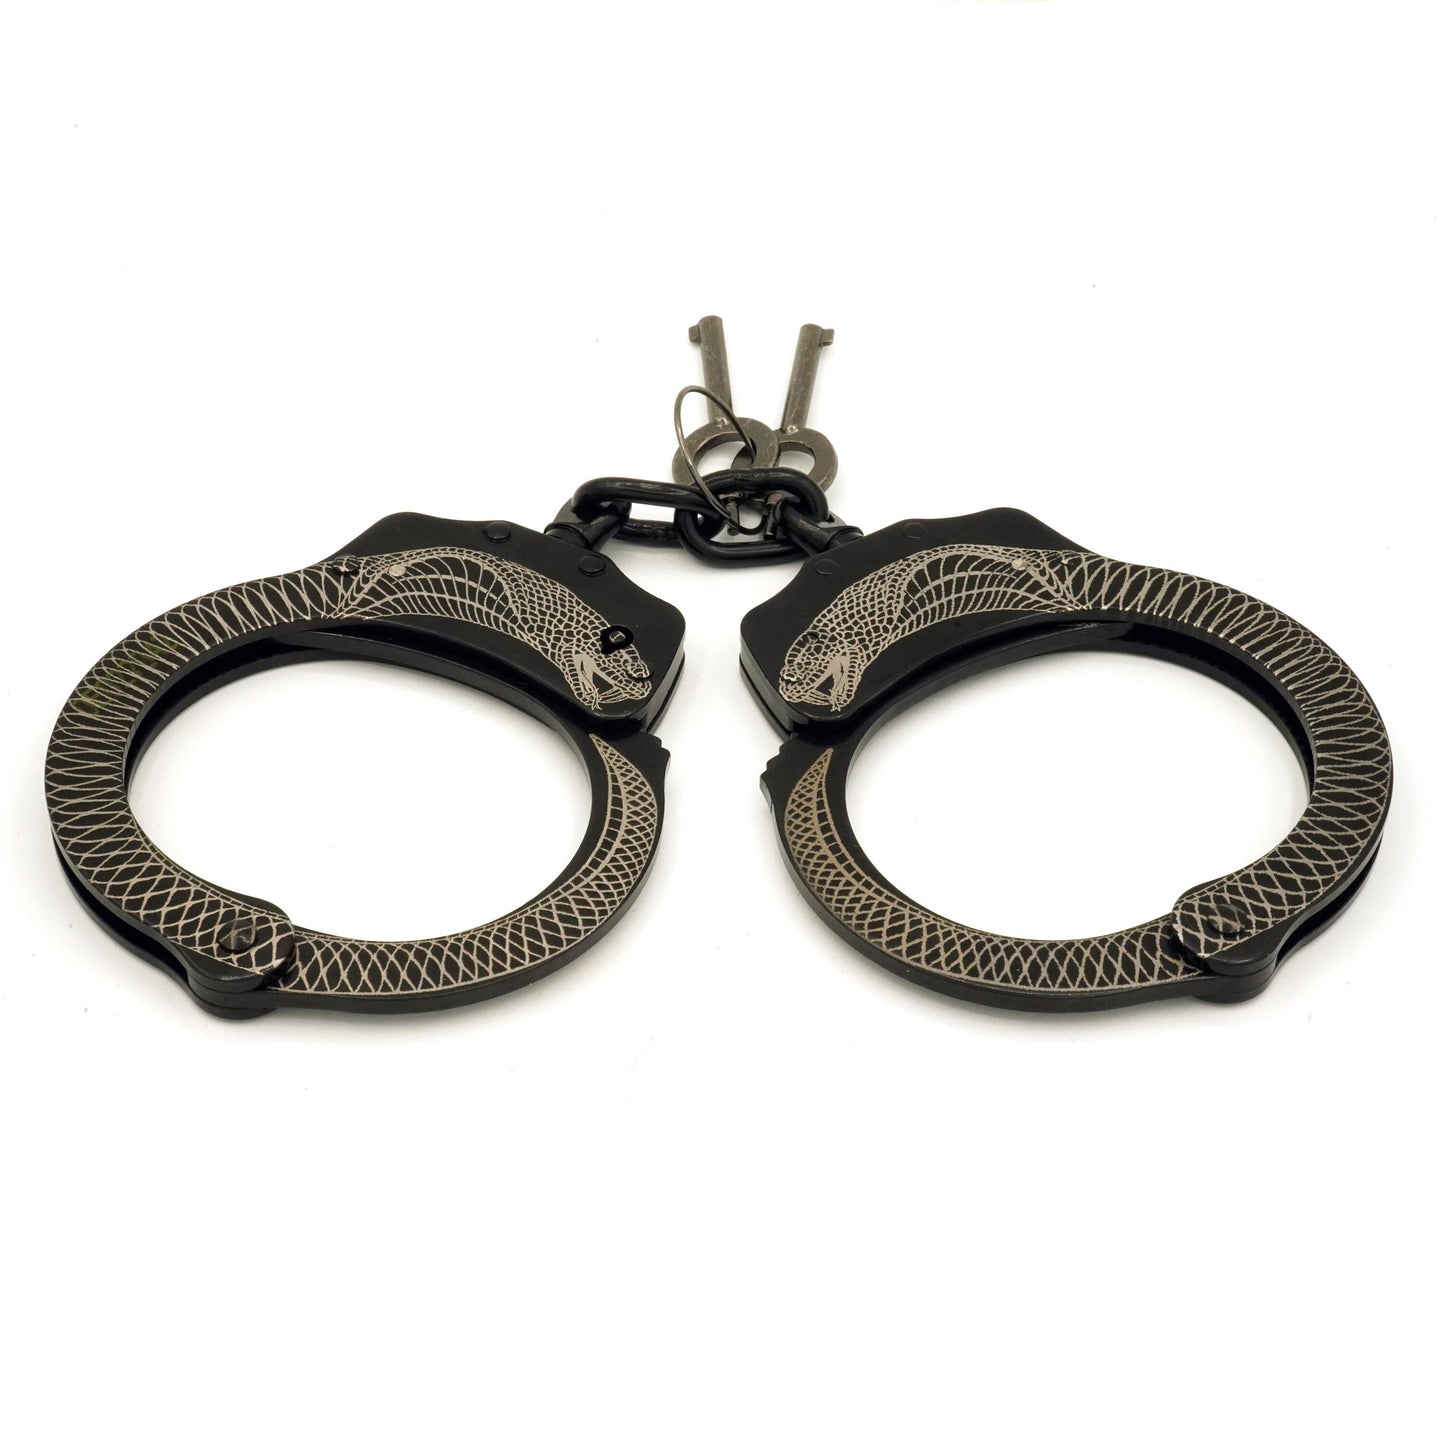 Ouroboros snake handcuffs, black handcuffs with quality engraving